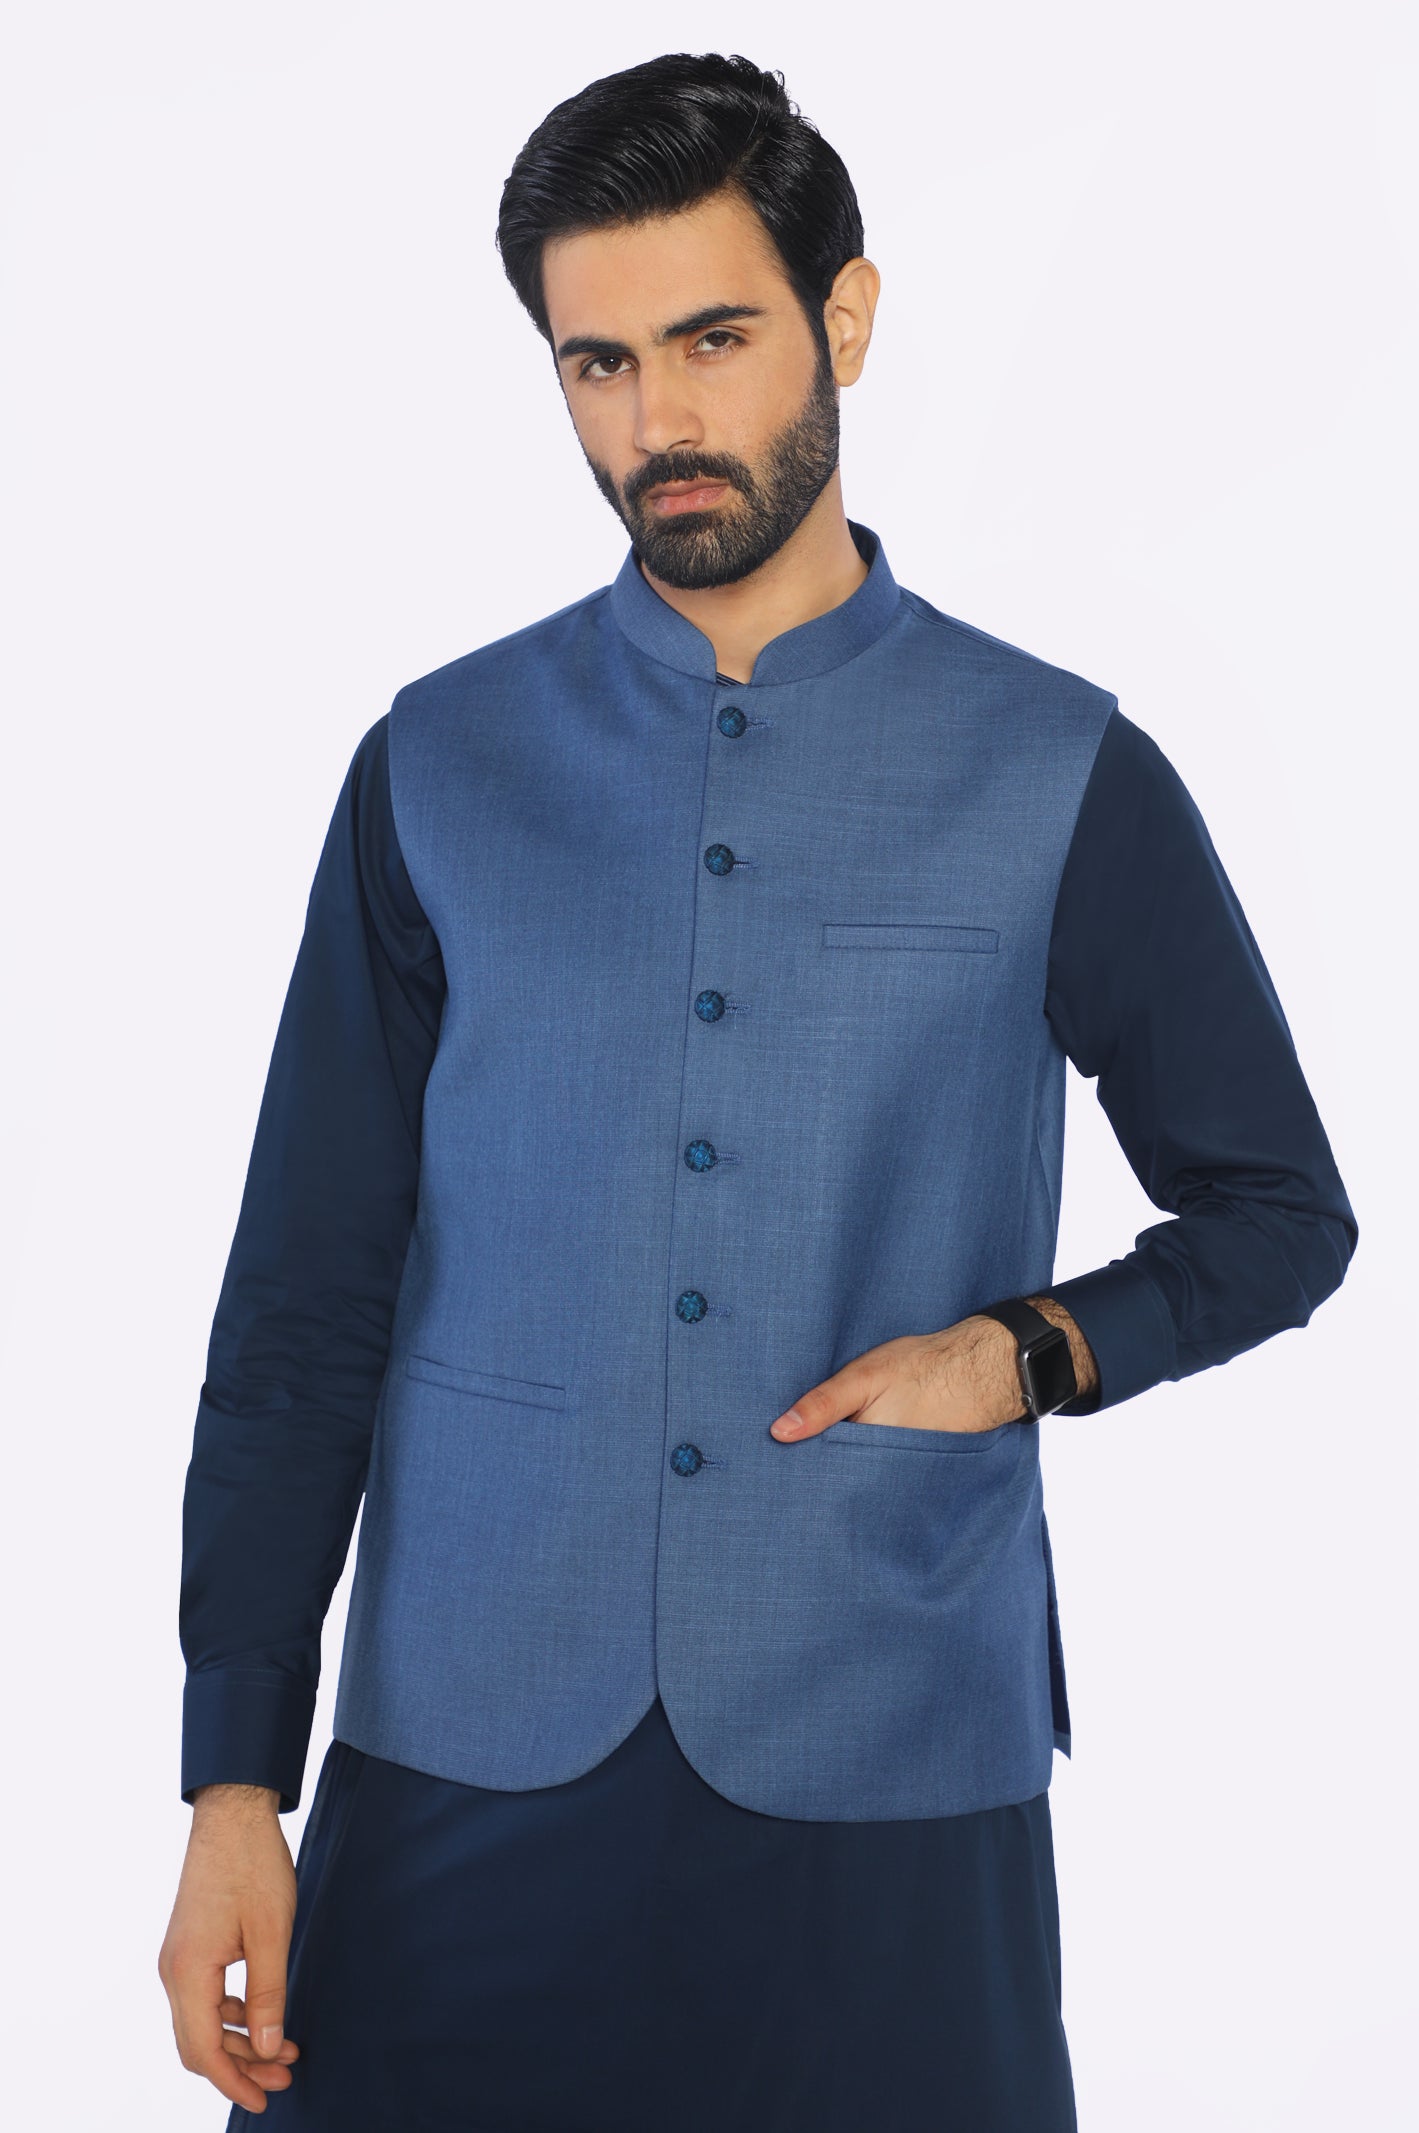 Royal Blue Waistcoat From Diners